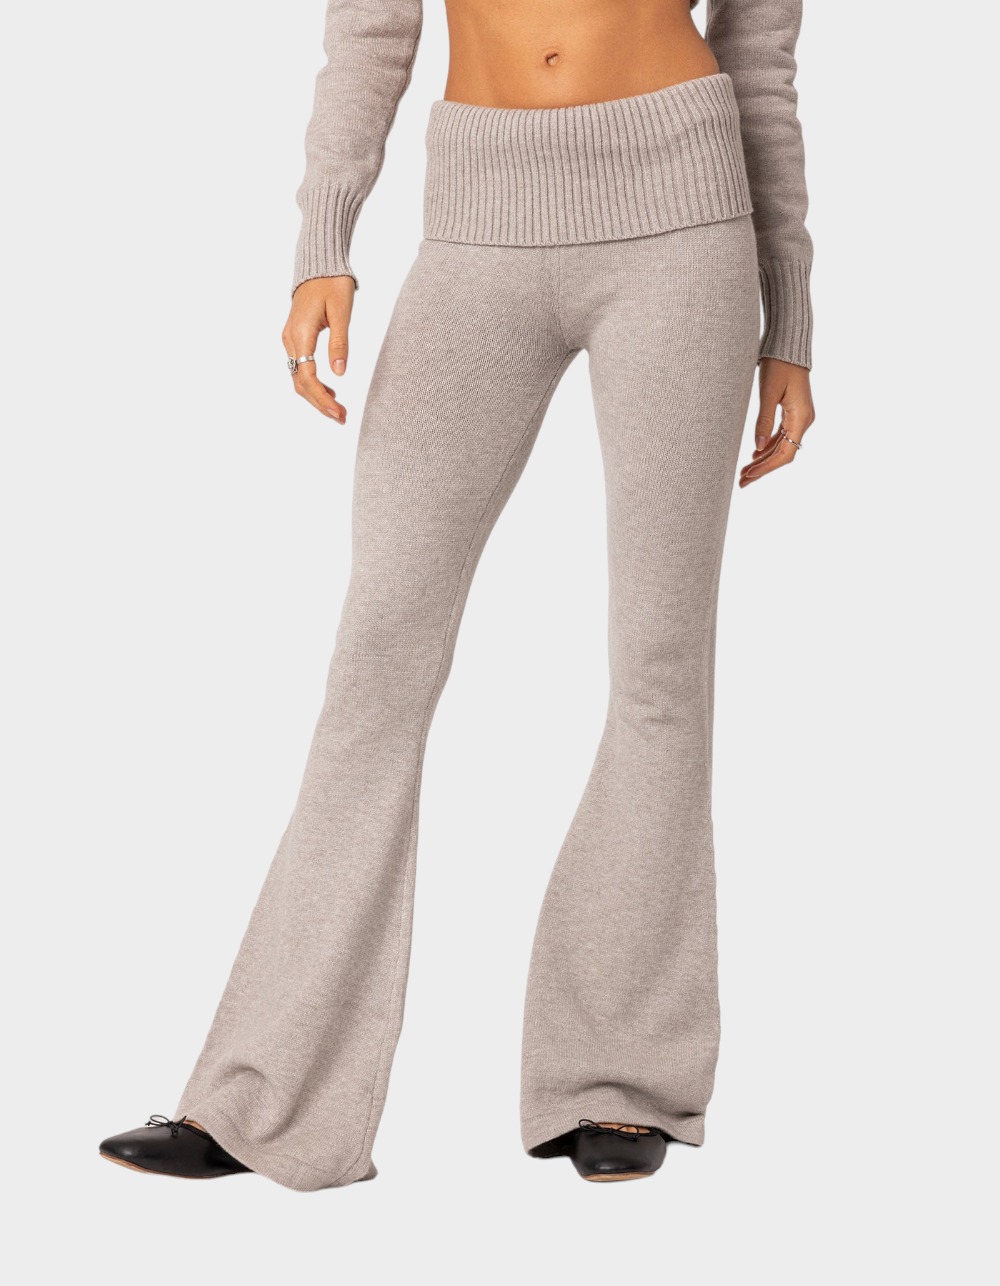 EDIKTED Desiree Knitted Low Rise Fold Over Pants - GRAY